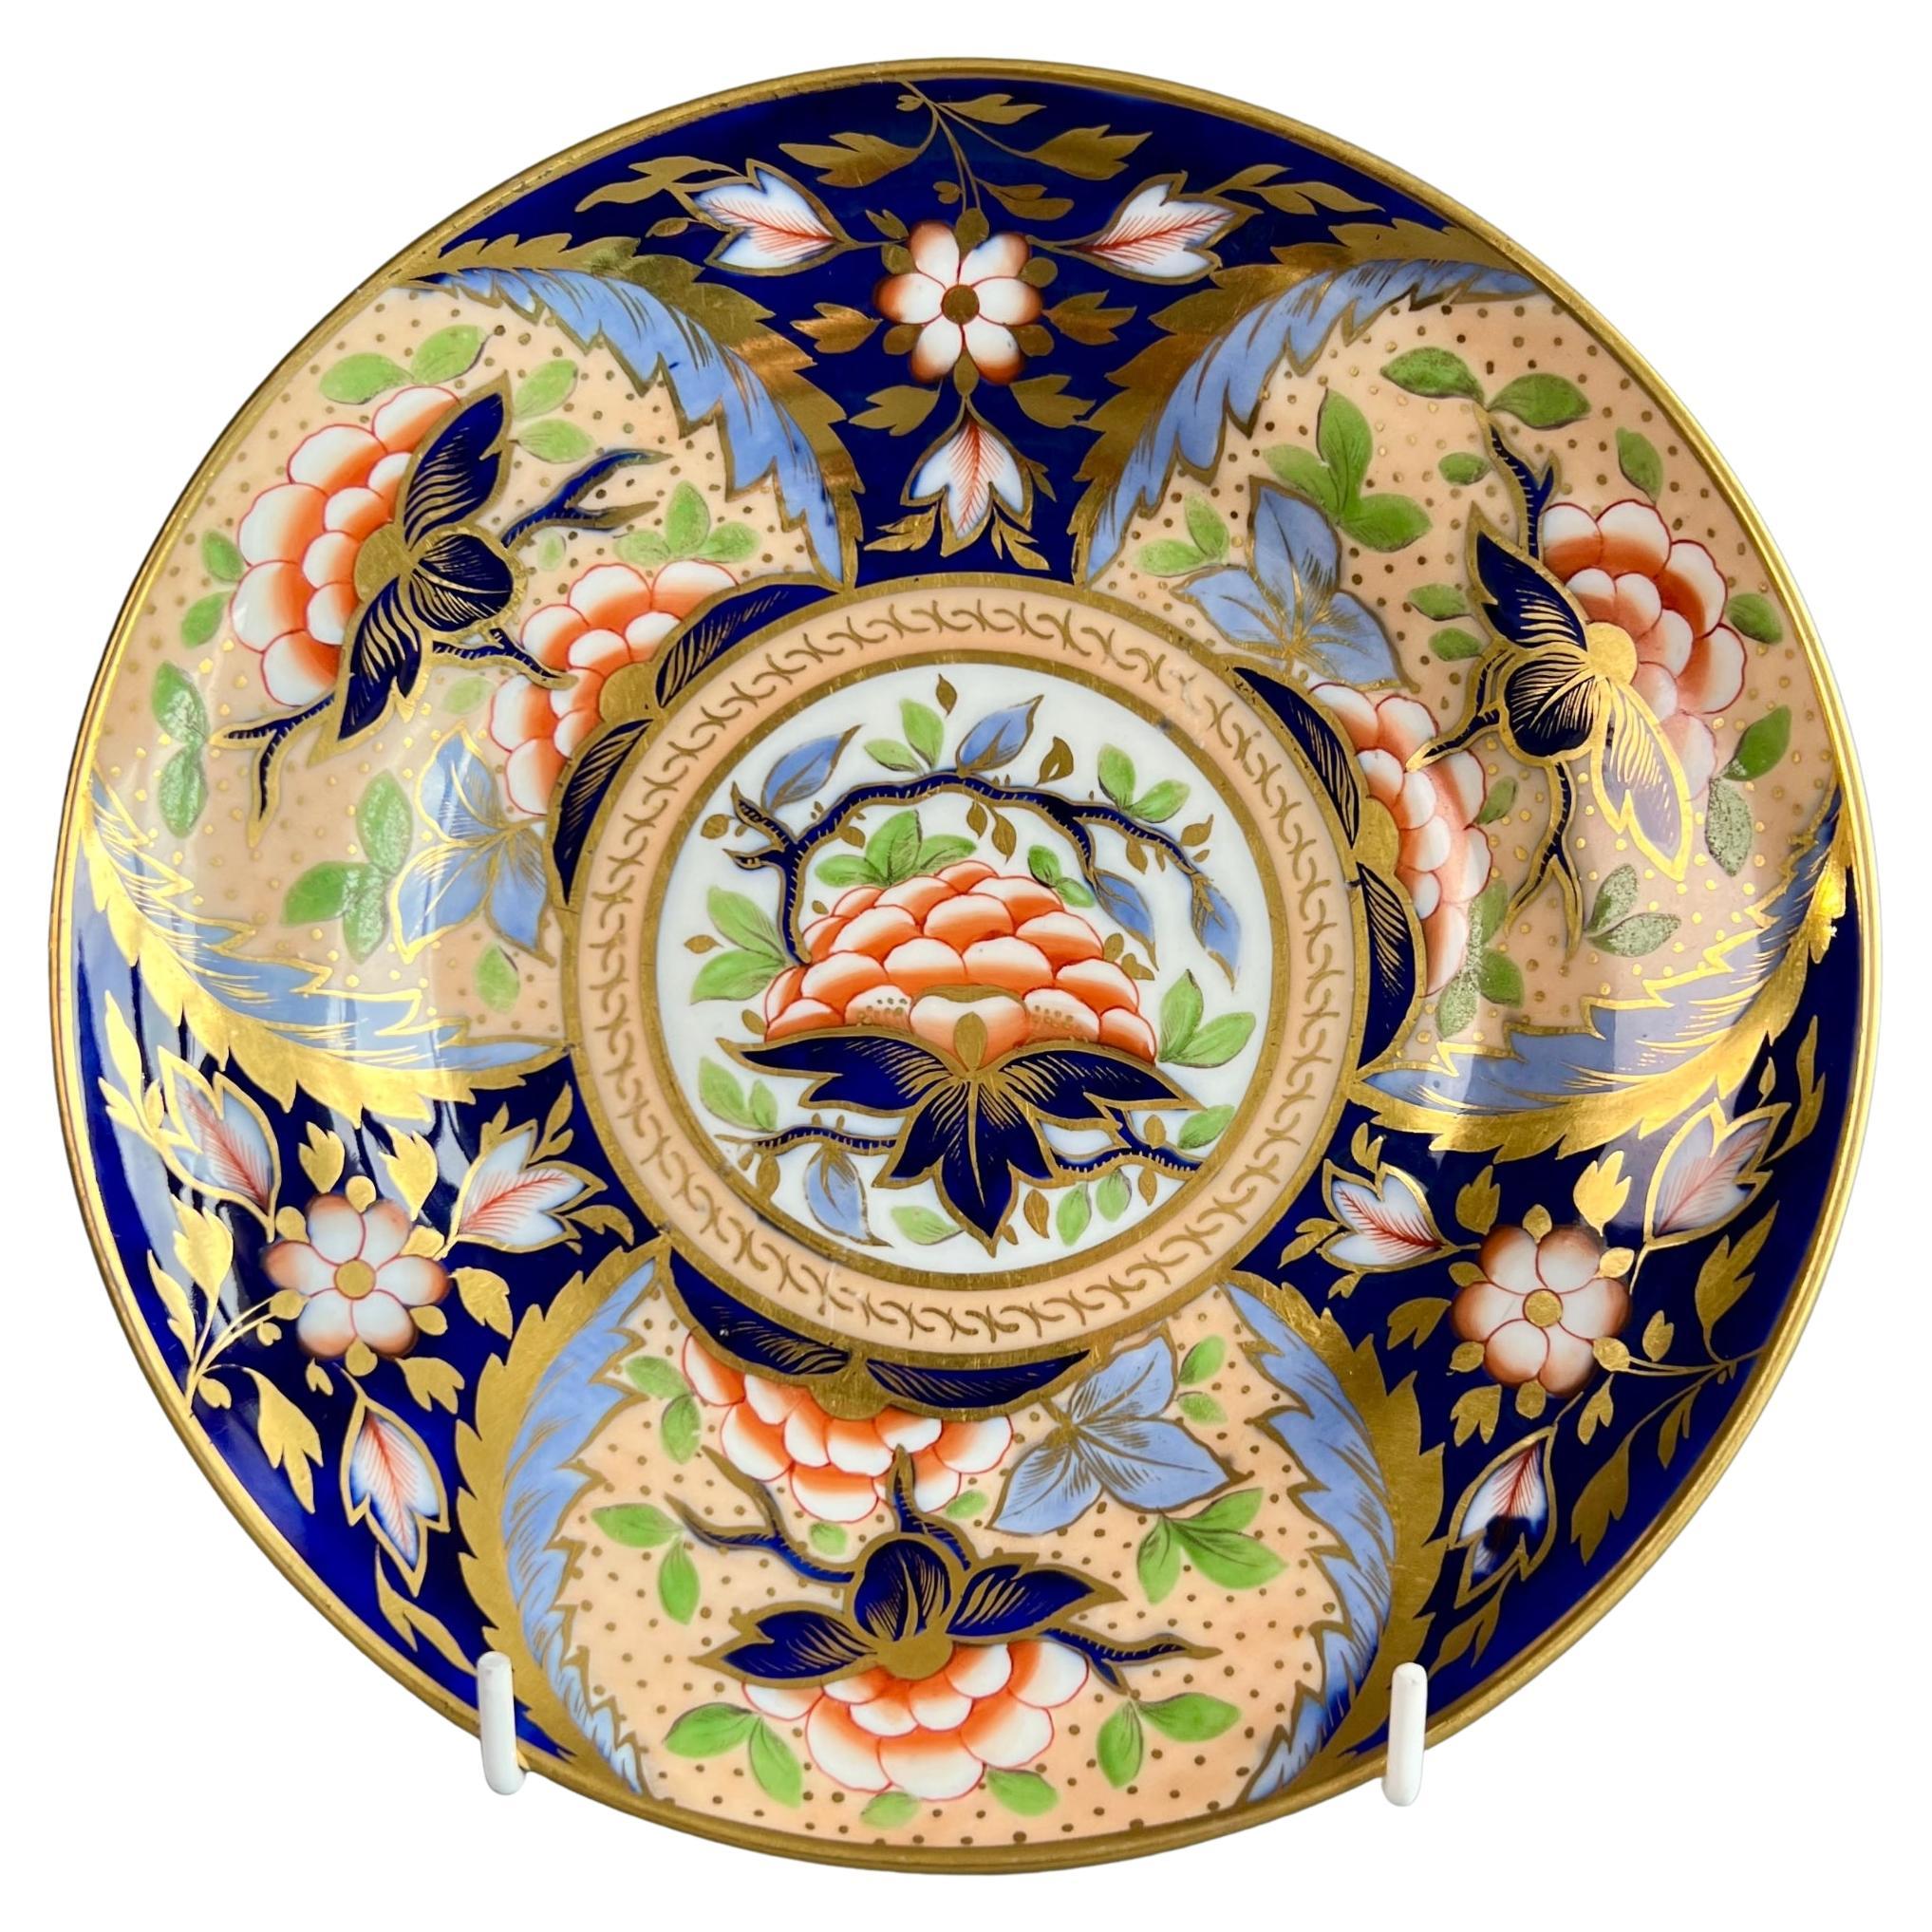 Ridgway Saucer Dish or Plate, Polychrome Chinoiserie Peonies, Regency Ca 1815